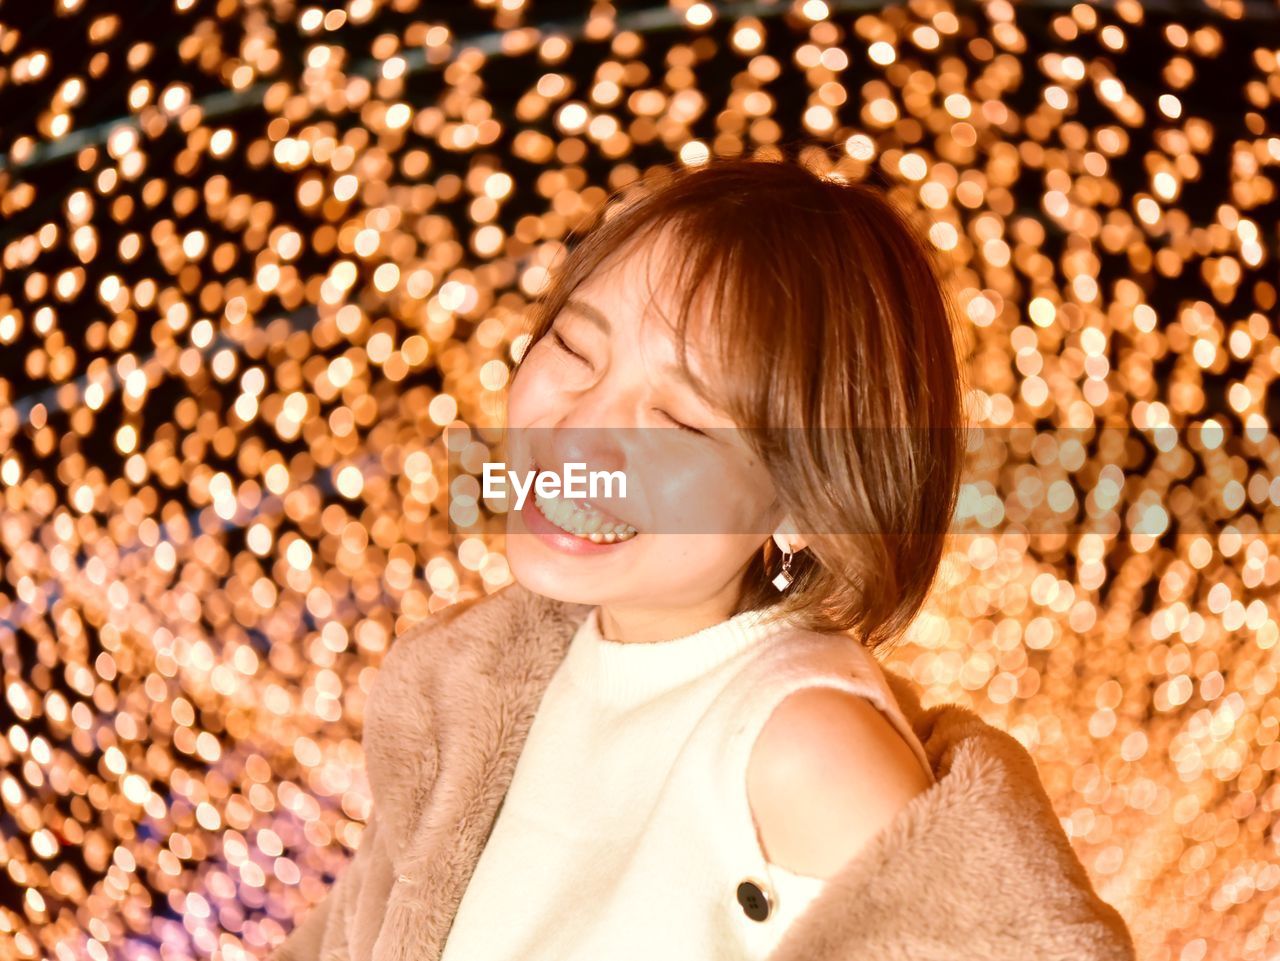 Smiling woman against illuminated lights